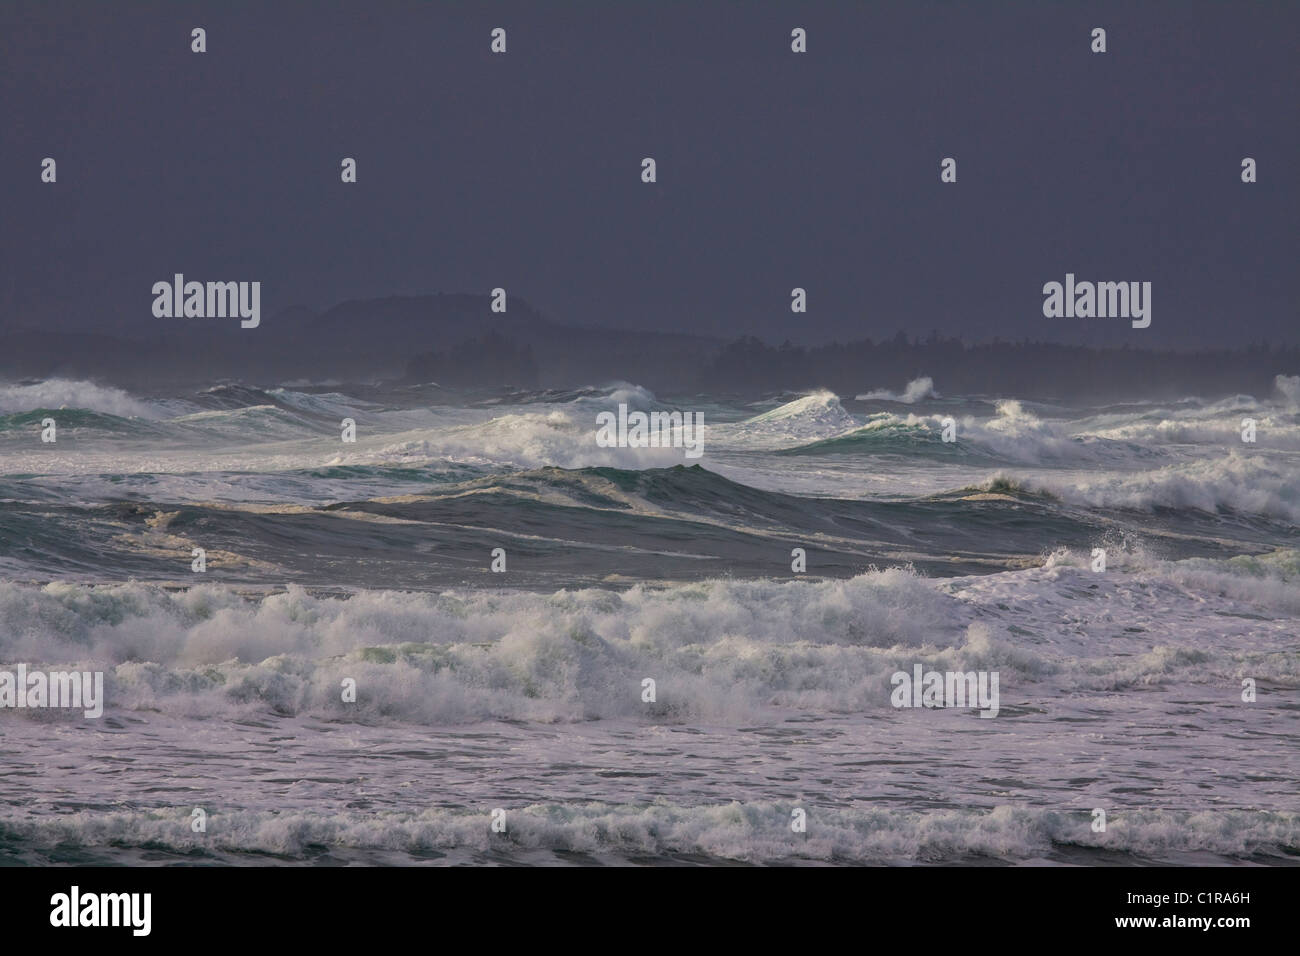 Large swells and turbulent, dangerous waves, Pacific Rim National Park, Vancouver Island, British Columbia Stock Photo